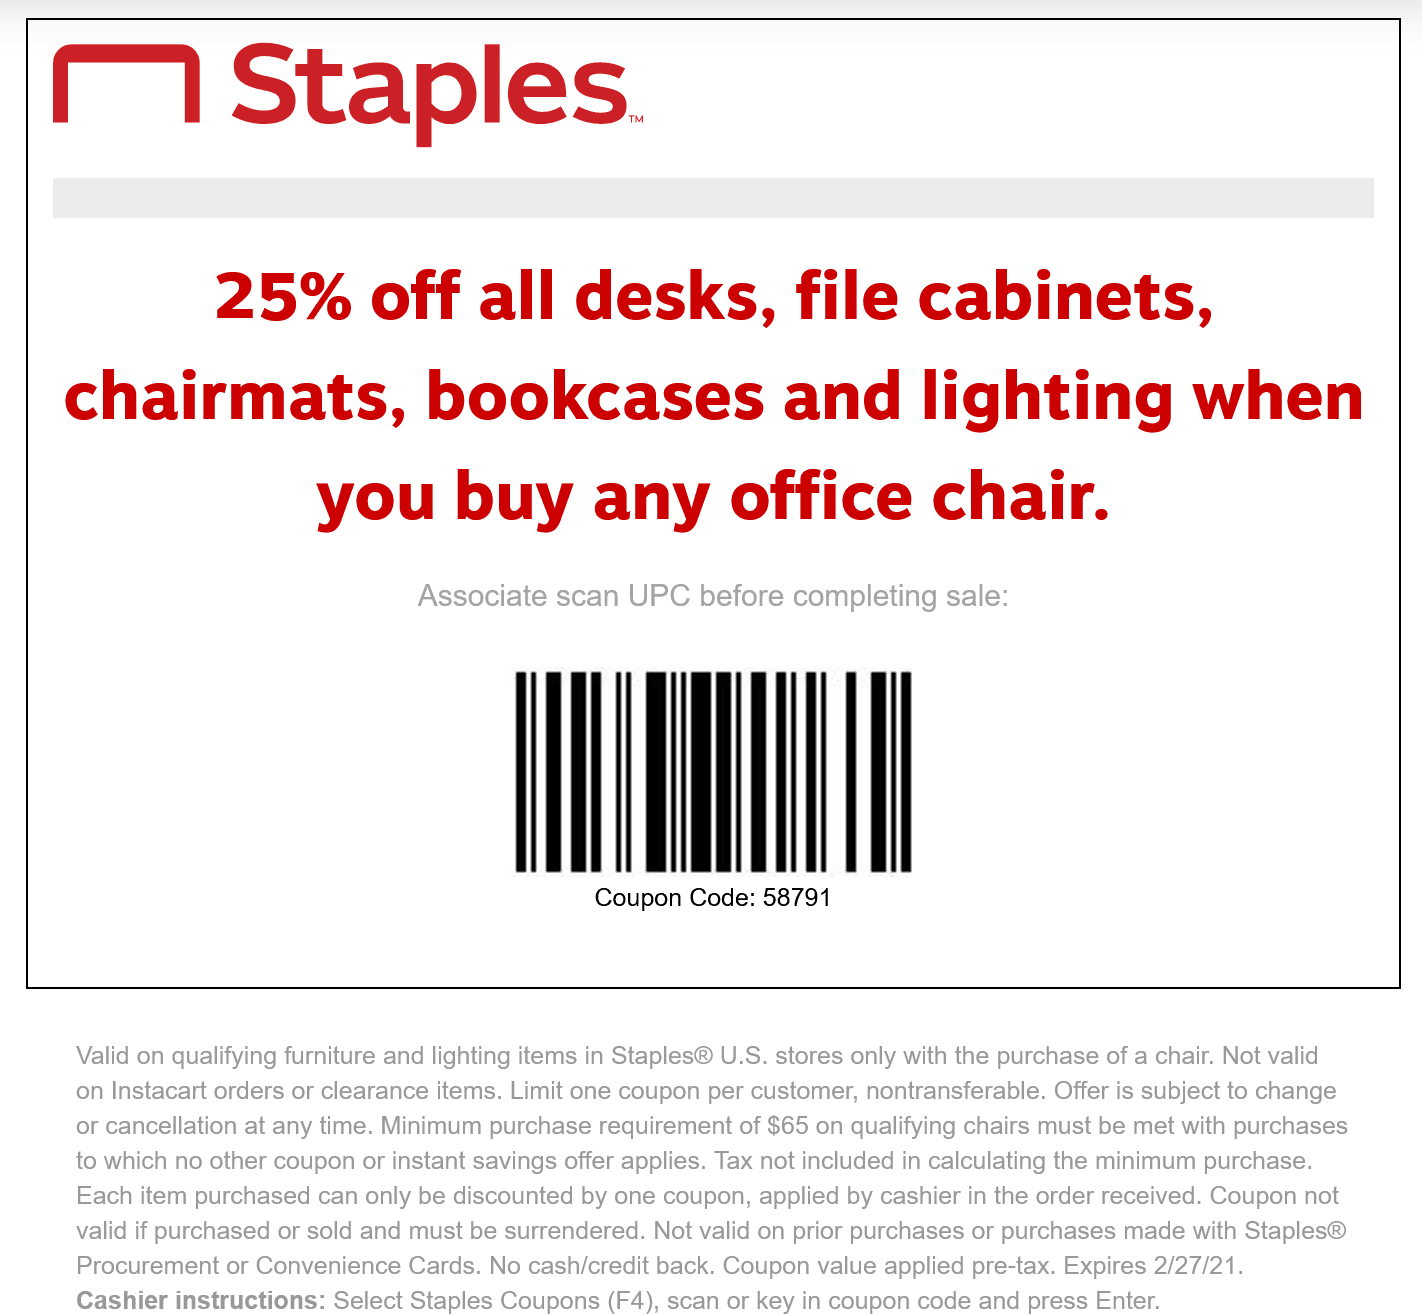 25 off office furniture with your chair at Staples staples The Coupons App®